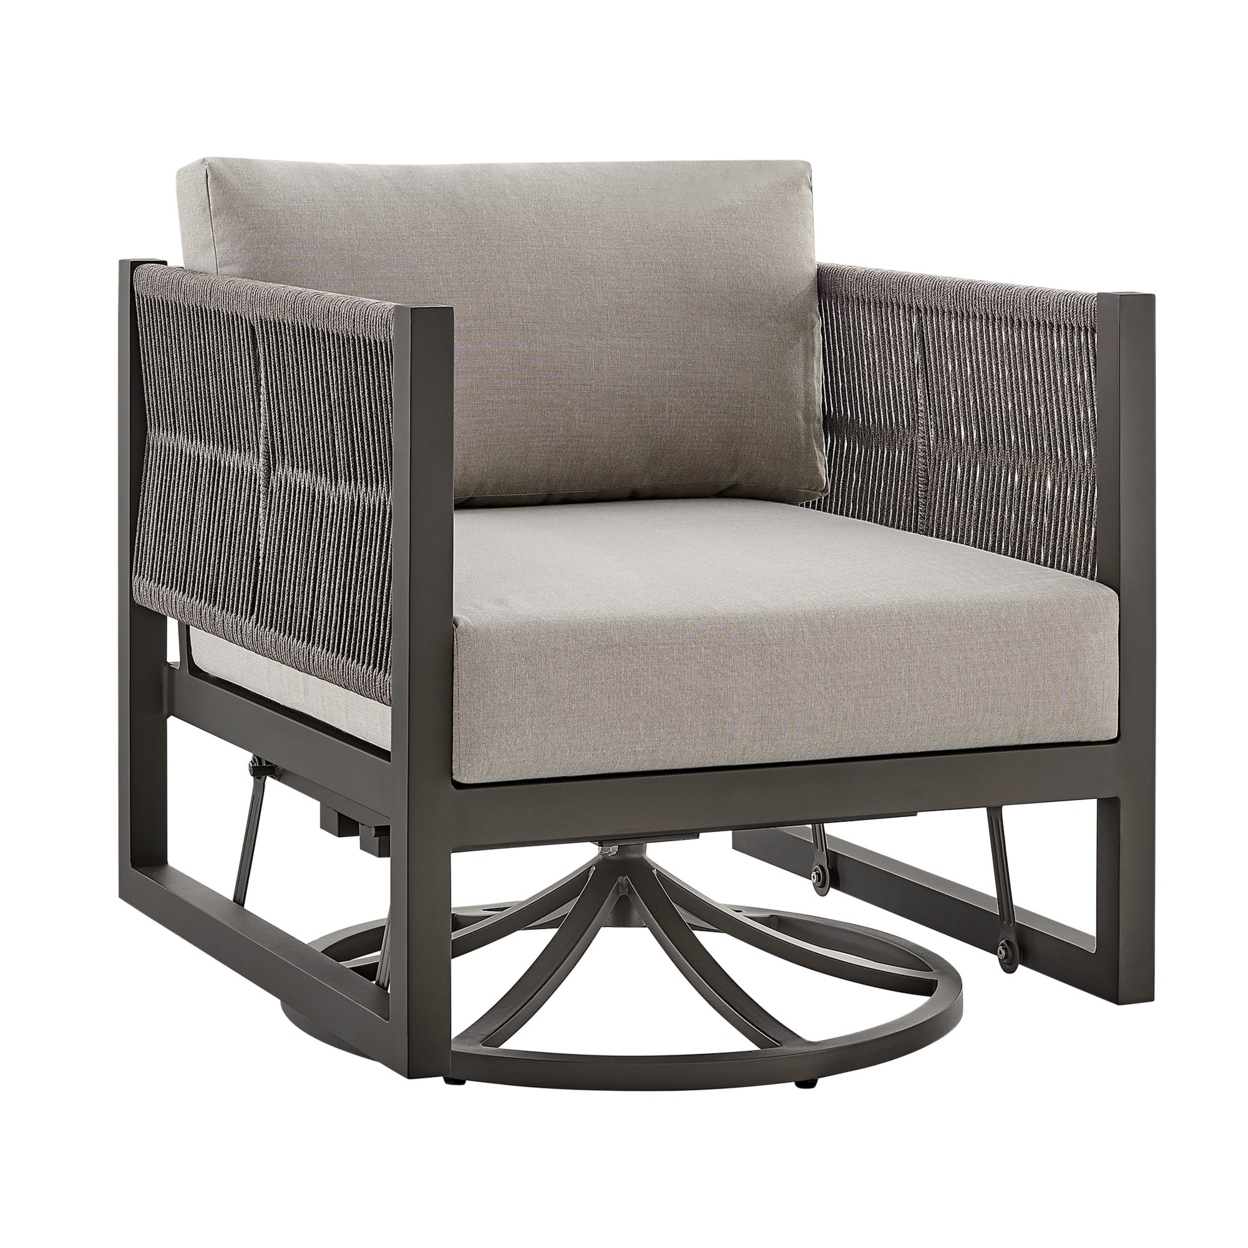 Remy 31 Inch Patio Swivel Lounge Chair, Brown Aluminum Frame And Cushions- Saltoro Sherpi